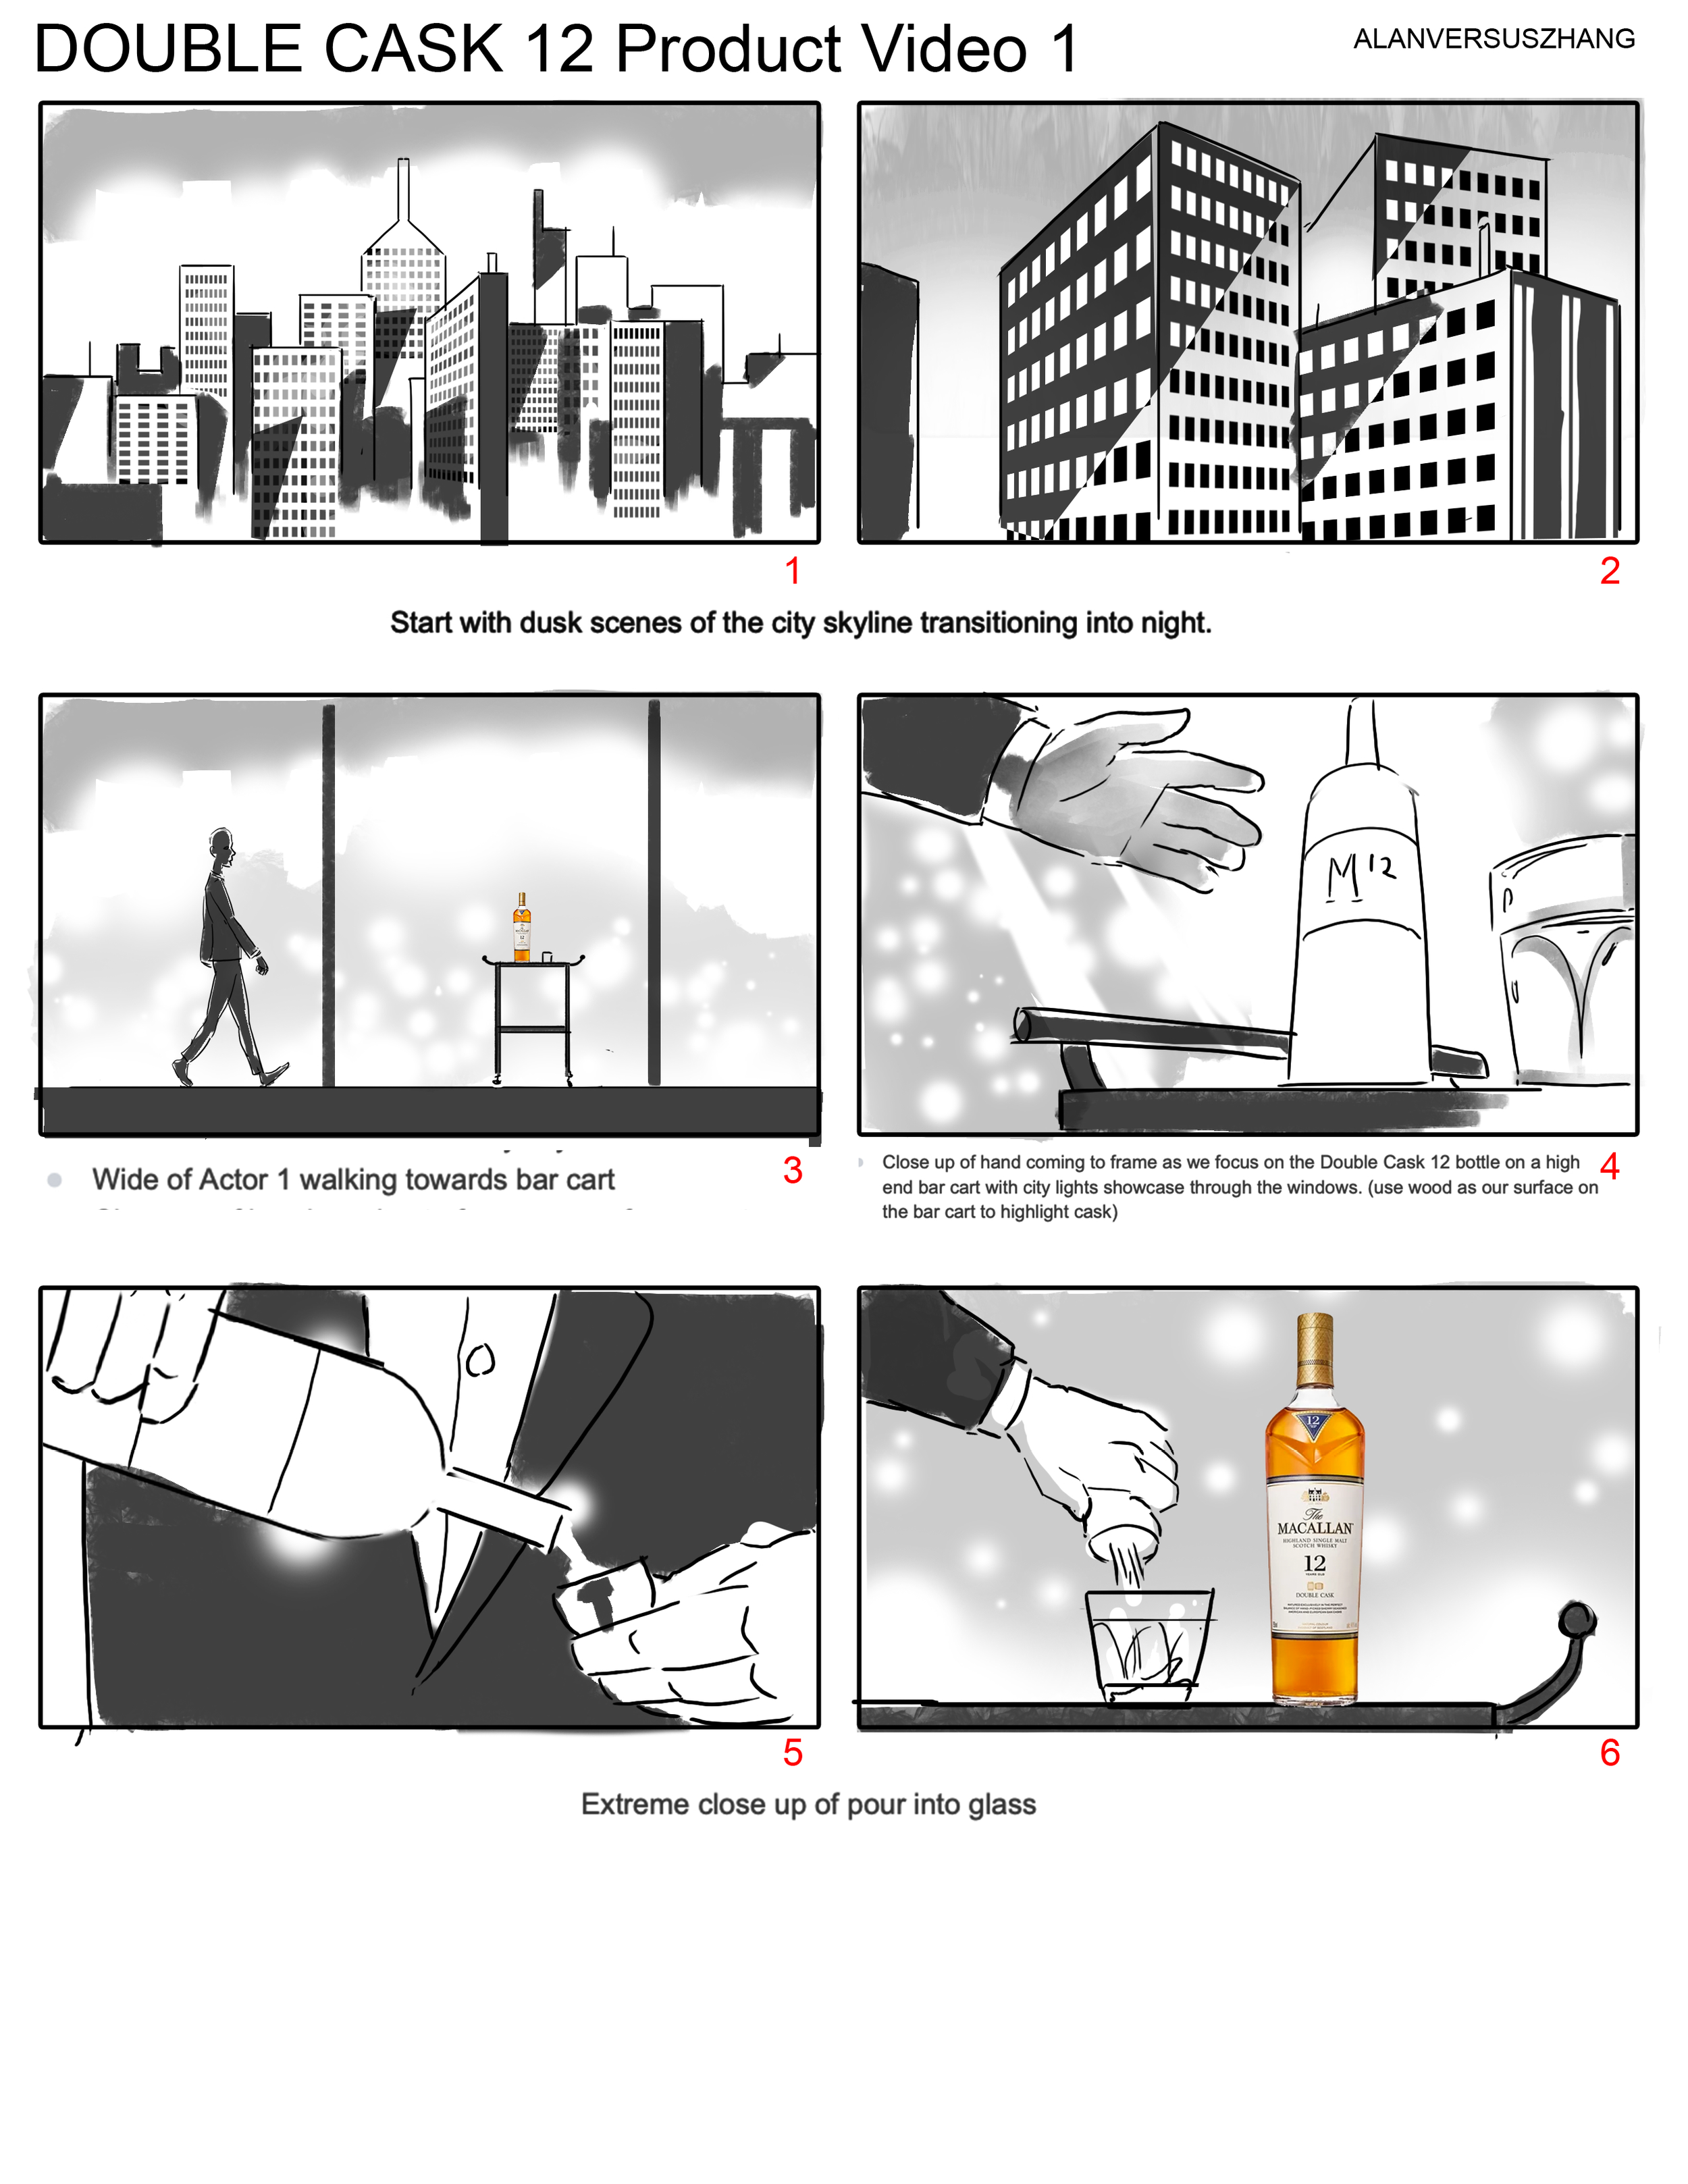 11.10.23_Macallan_Storyboards_Page_01_Image_0001.png